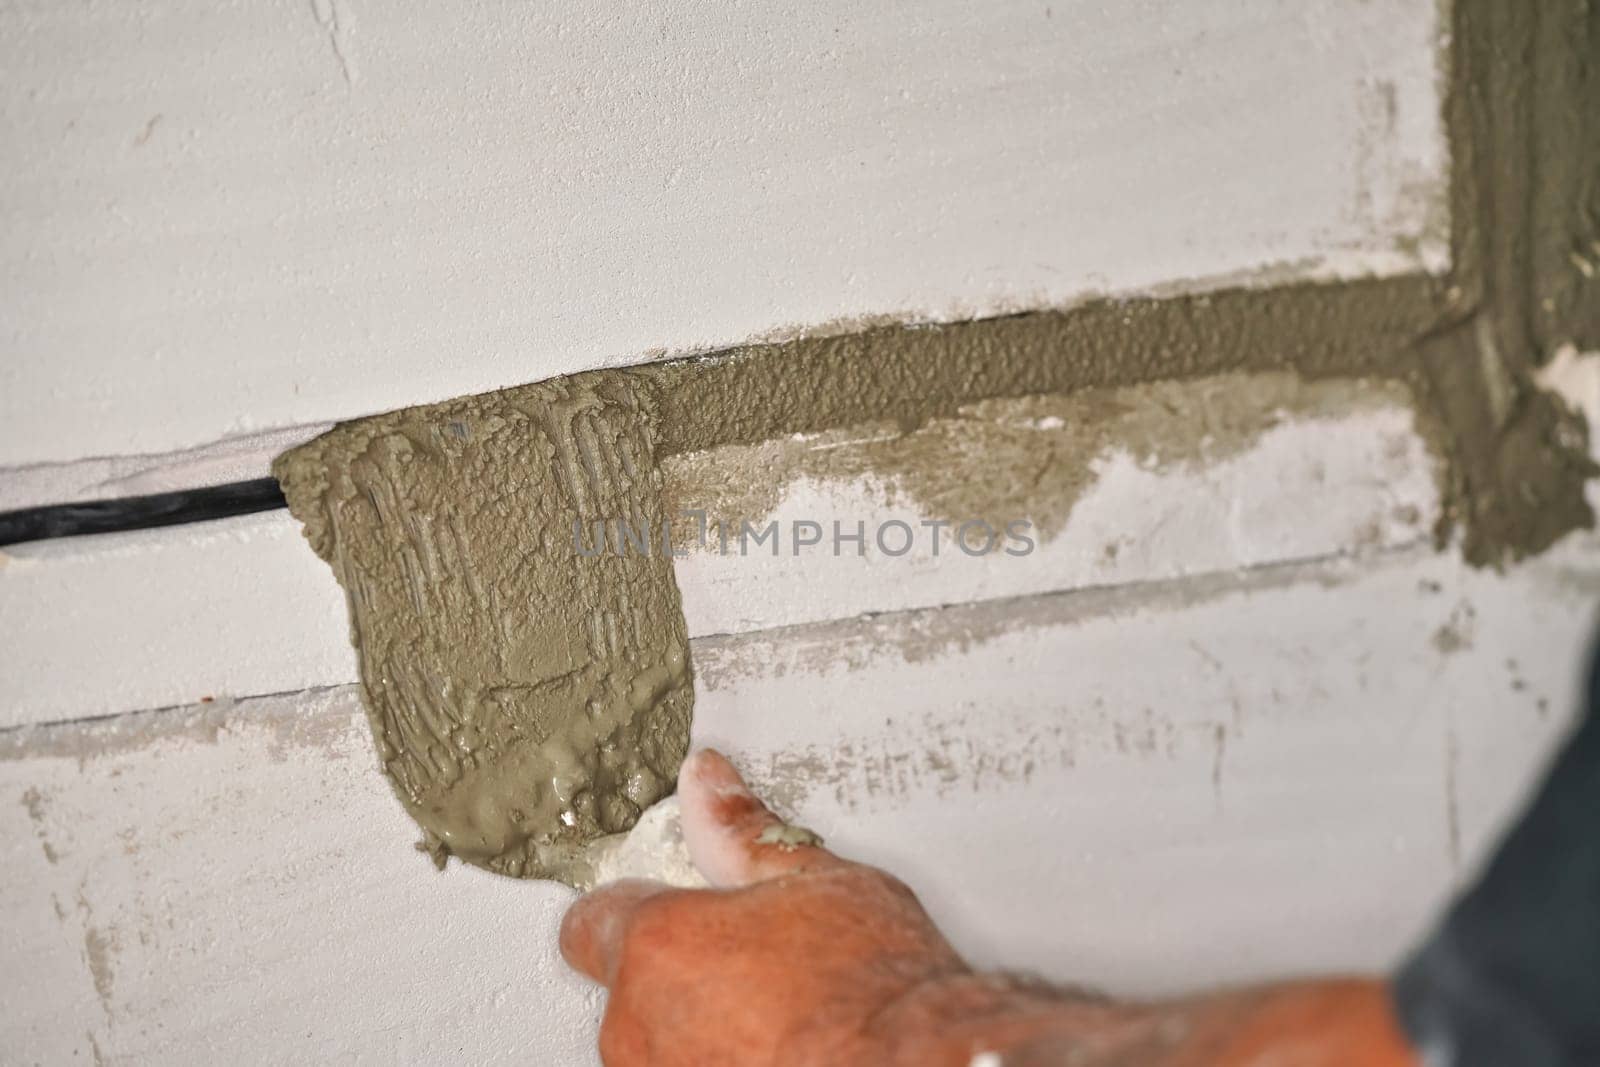 Construction worker securing electric sockets groove installed on bare wall with mortar cement paste - filling holes using small scoop, detail to hands only by Ivanko